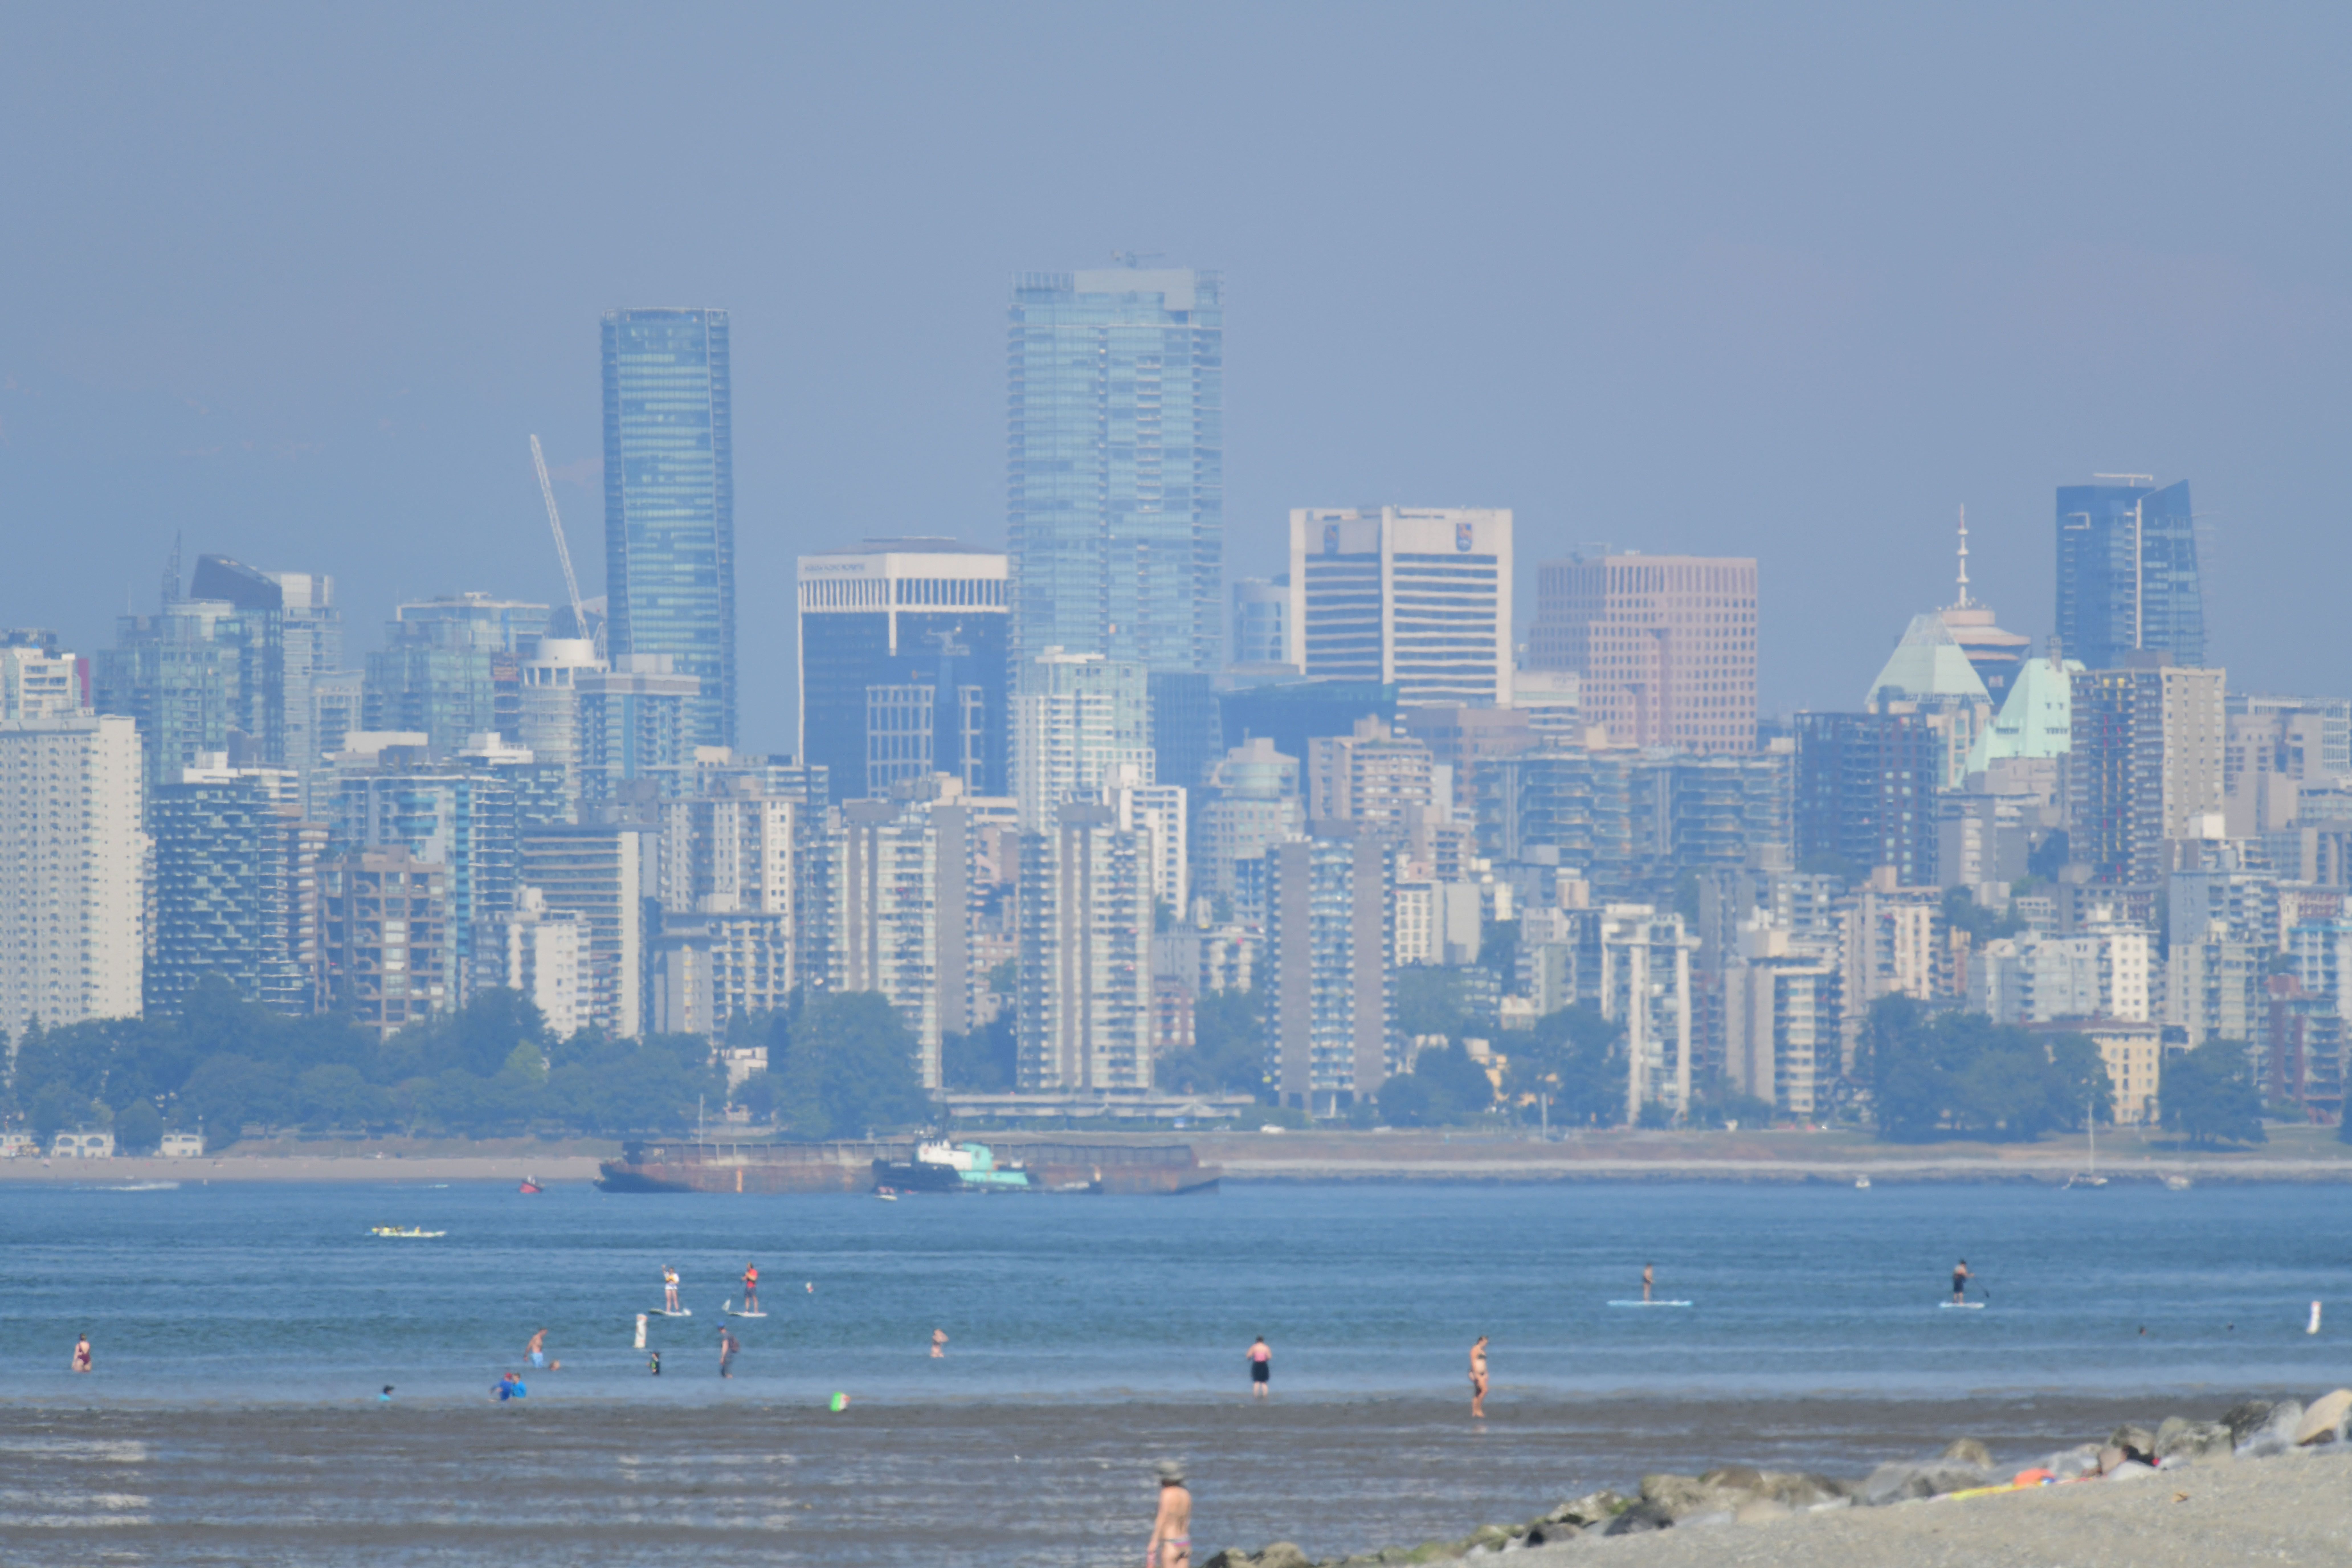 The city of Vancouver, British Columbia, is seen through a haze on a scorching hot day, June 29, 2021. Credit: Don MacKinnon/AFP via Getty Images